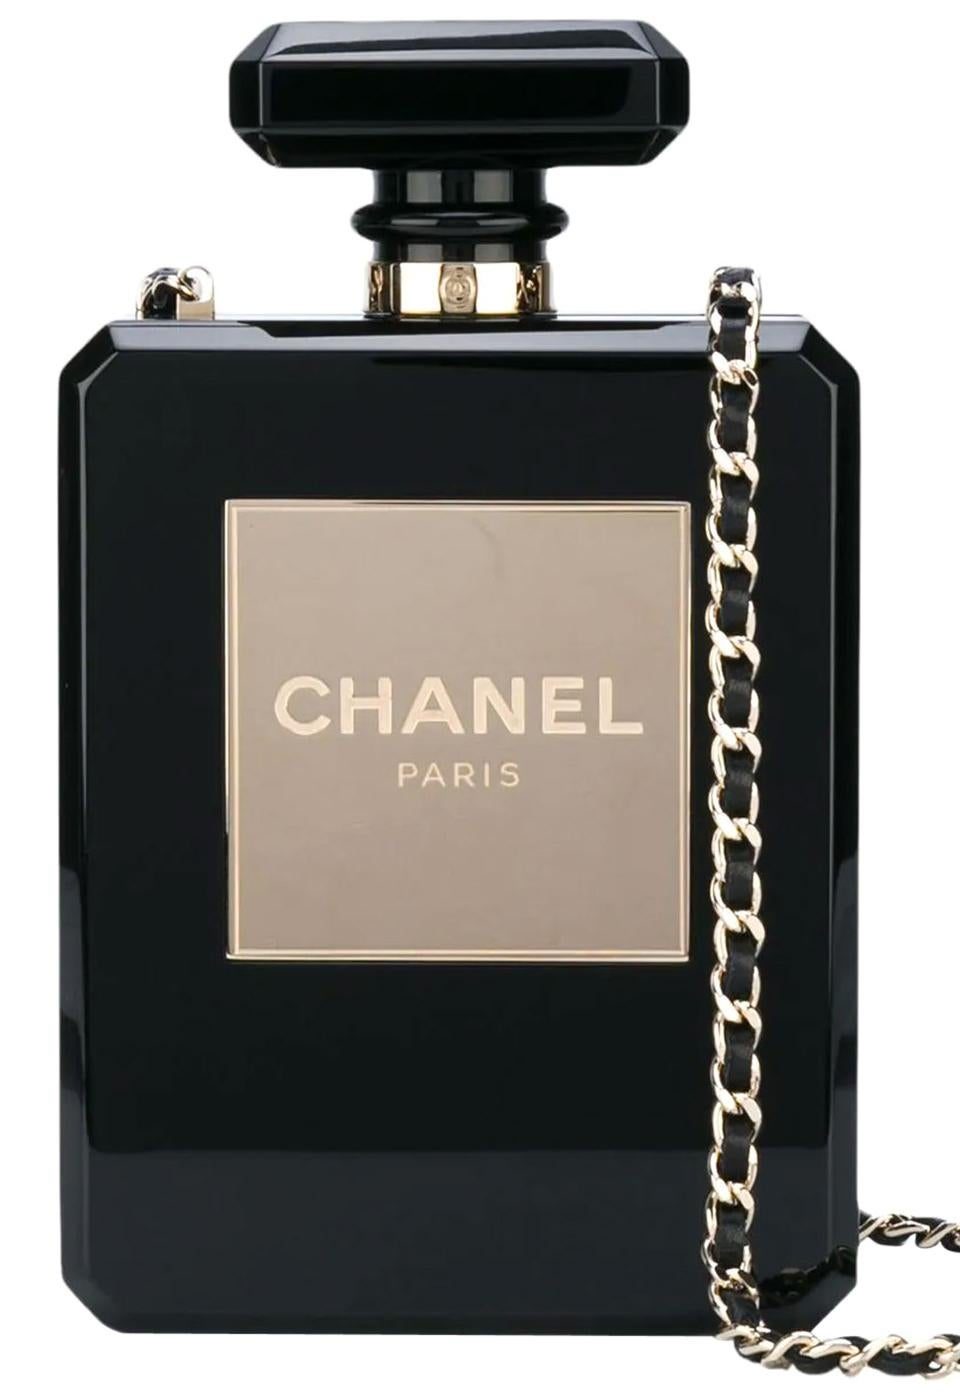 Impossible-to-Find Chanel Handbags Are House of Carver’s Stock-in-Trade